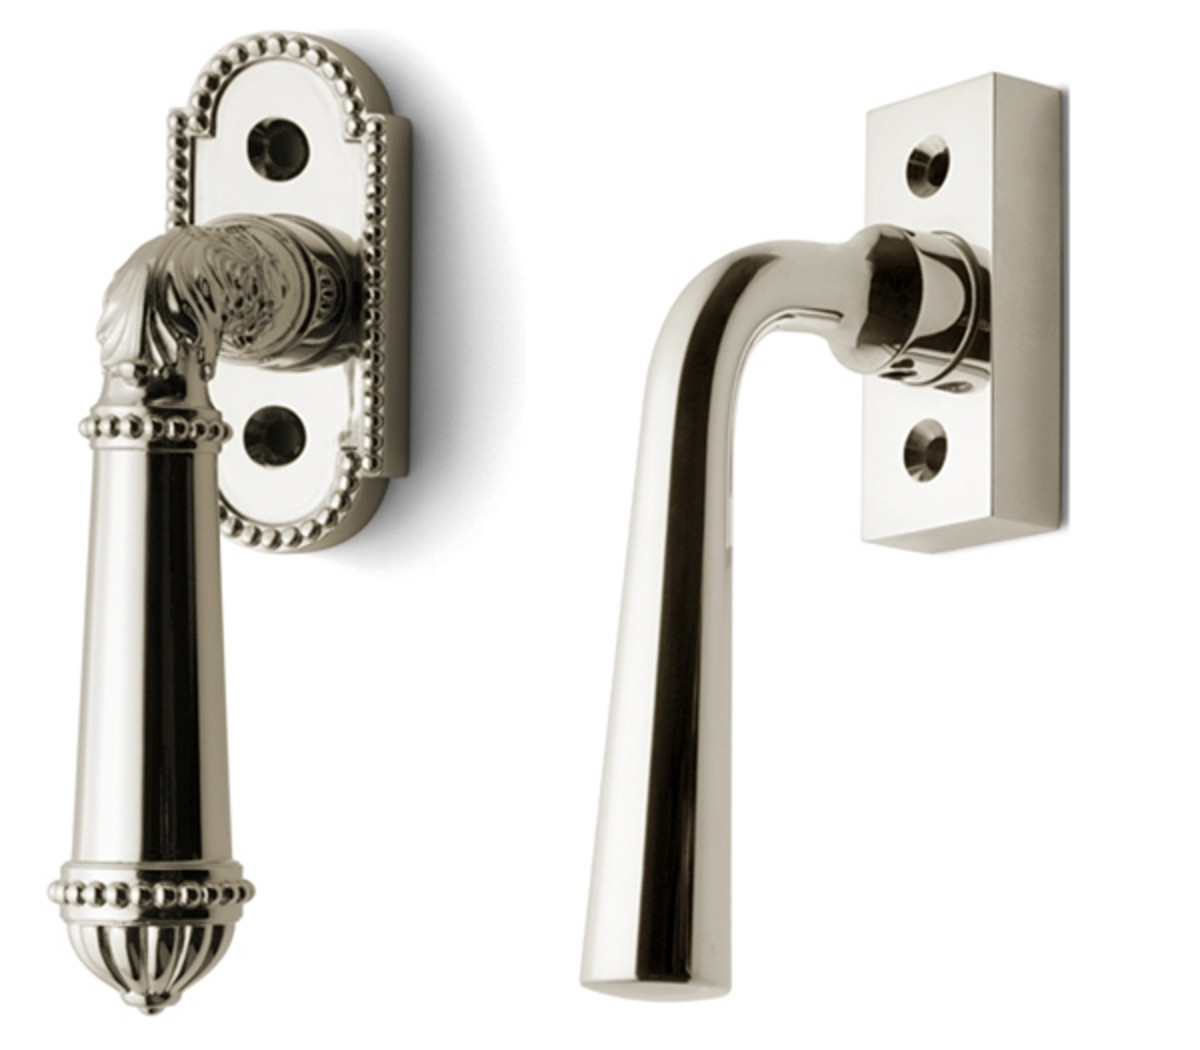 Window hardware from Nanz: The No 5601B beaded demilune escutcheon and the No 5628 rectangular escutcheon are designed to operate tilt & turn door mechanisms.